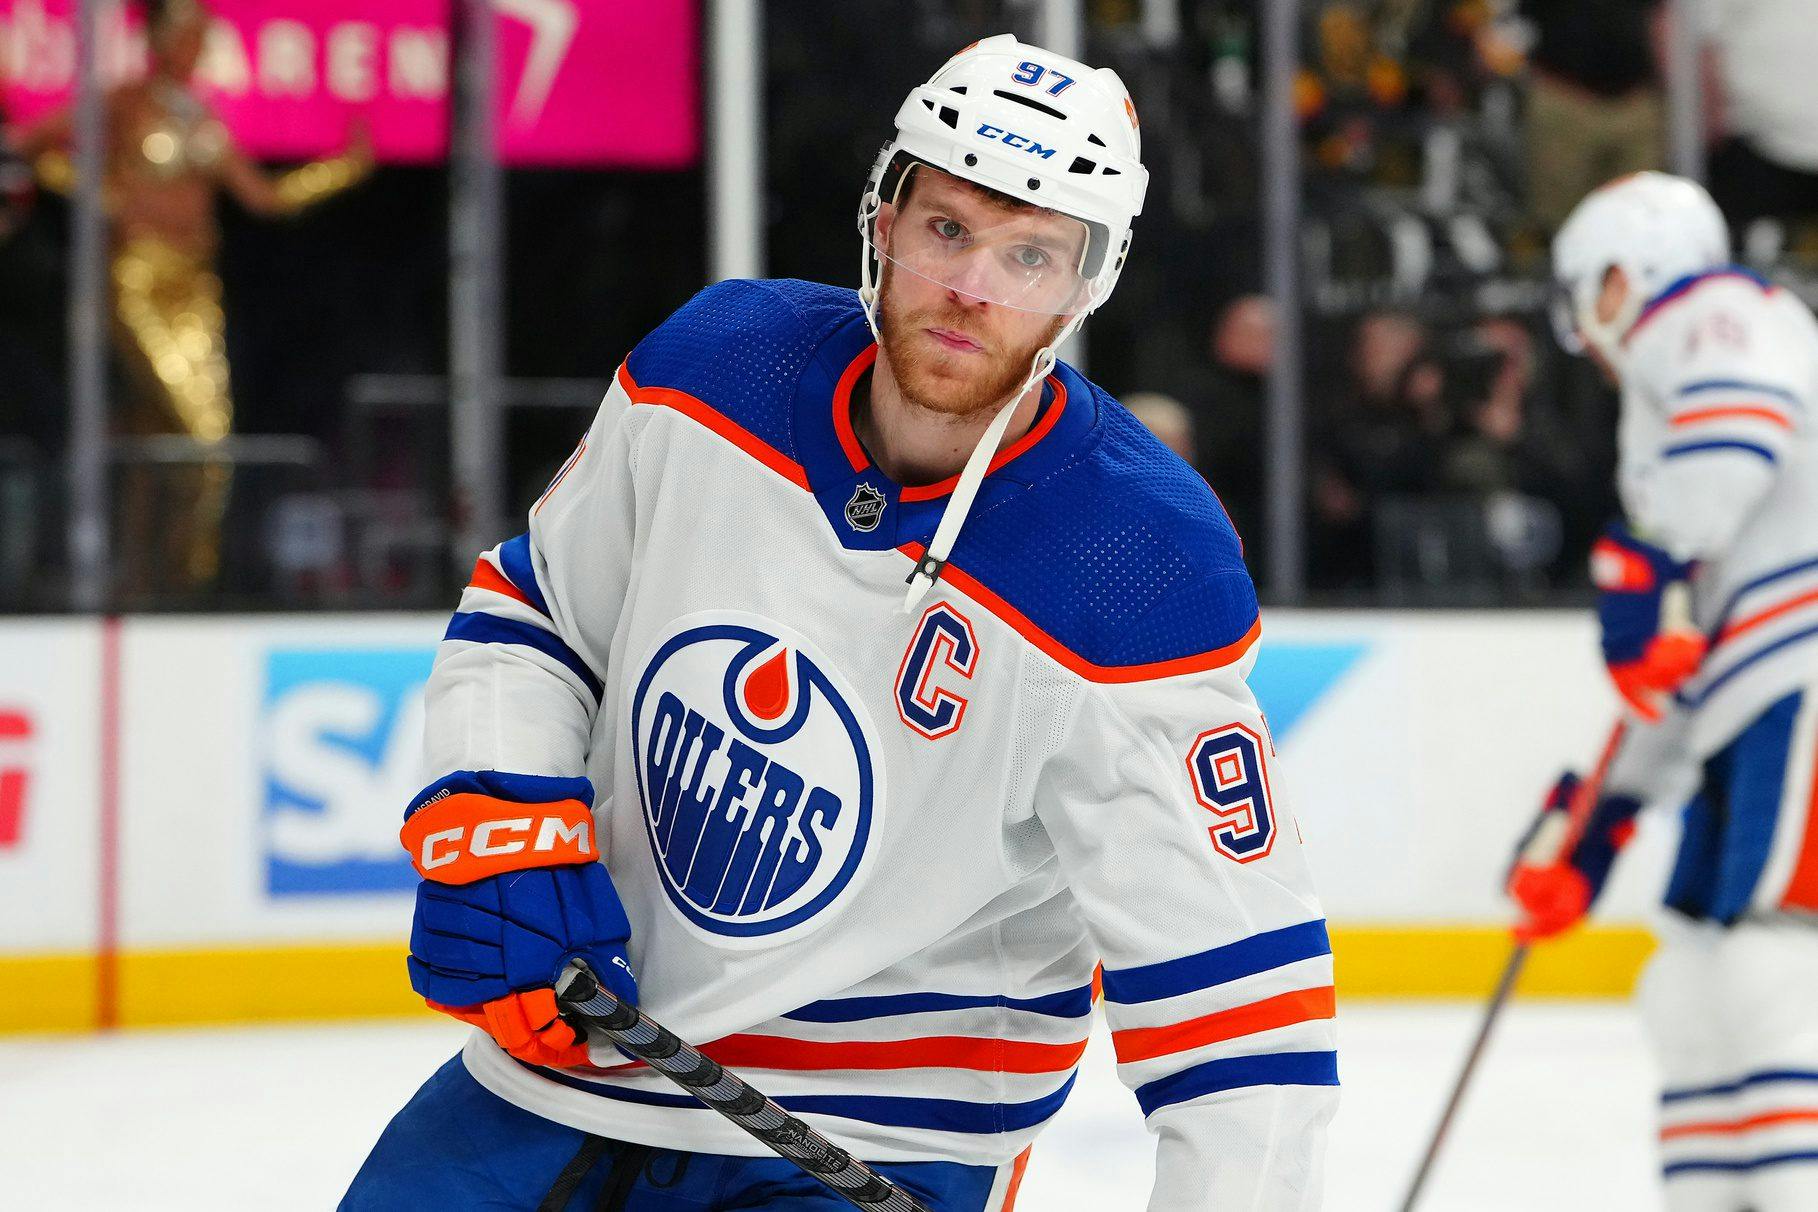 Have a Hart: Draisaitl has chance to join past Oilers greats in awards vote